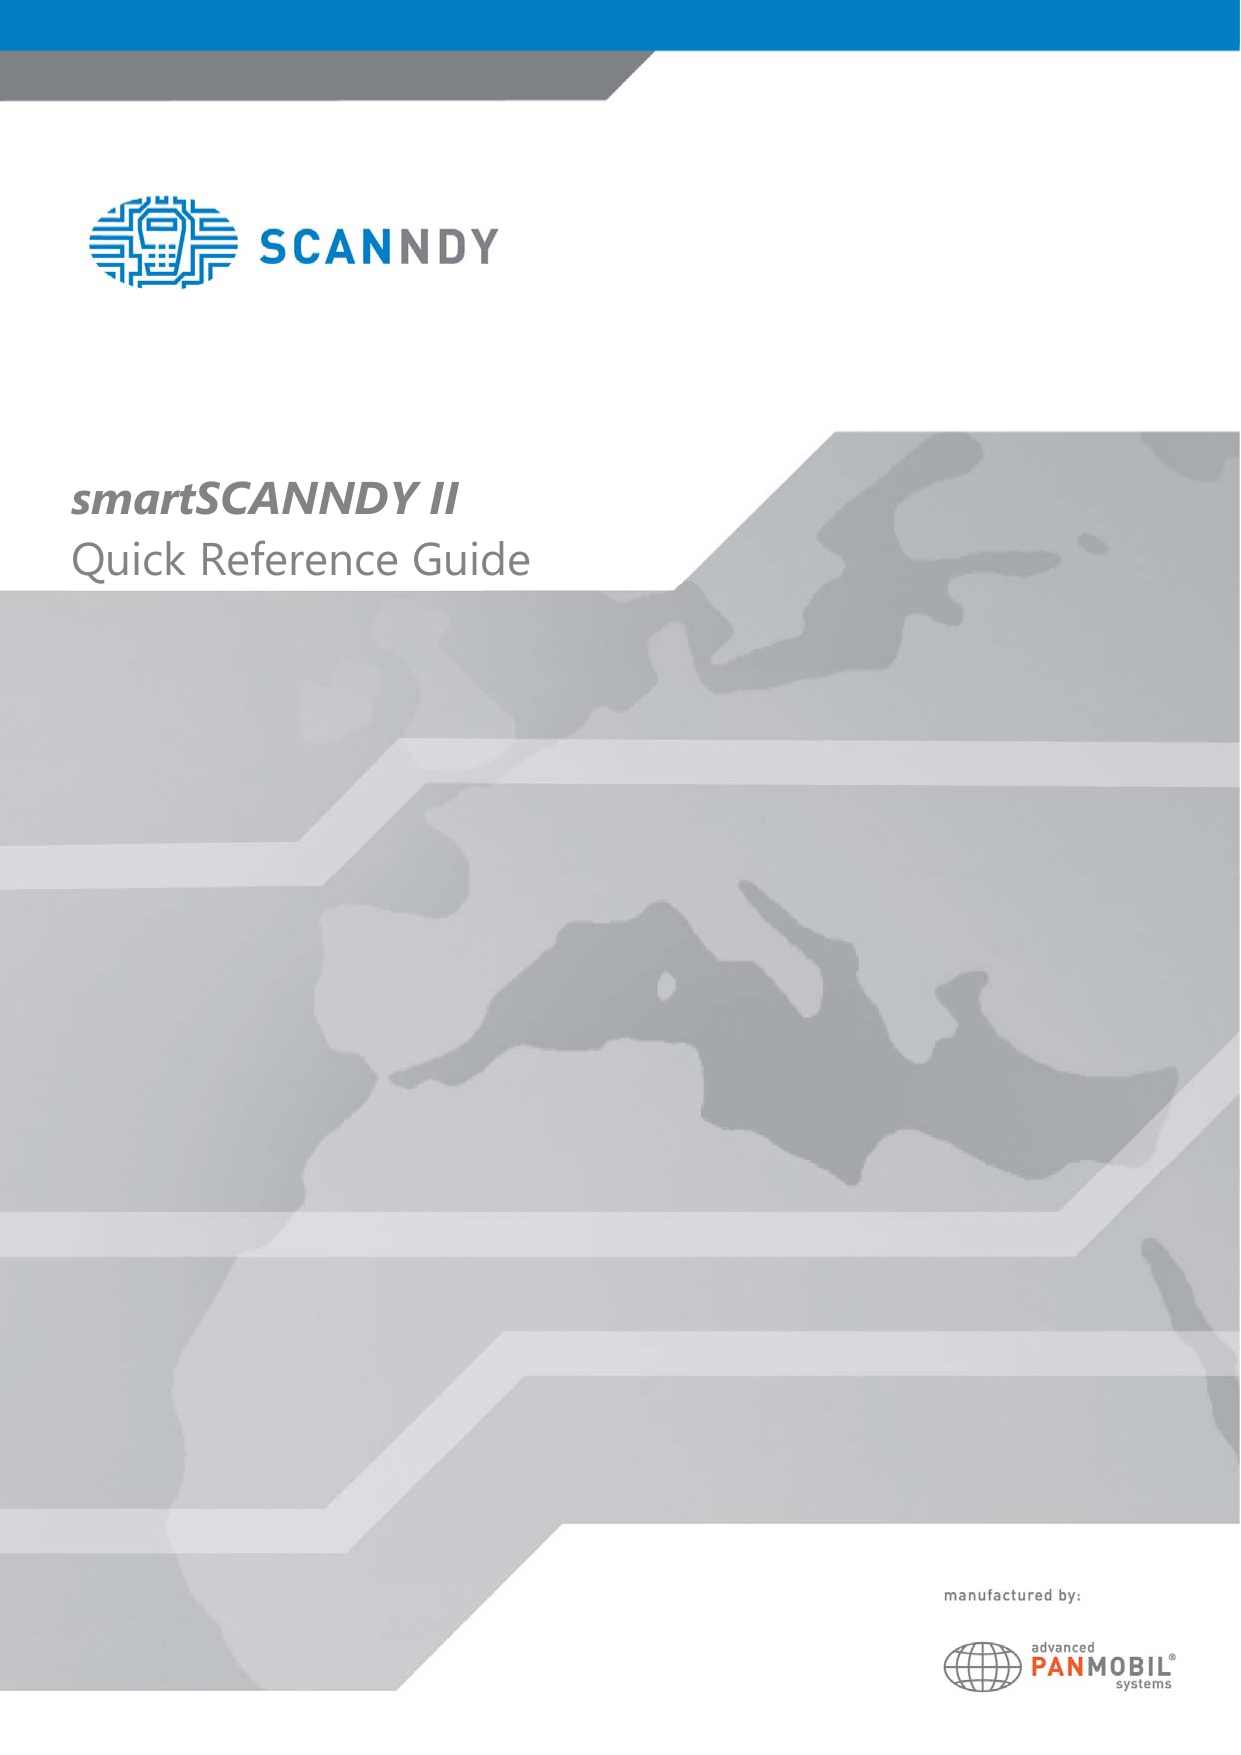  SCANNDY USER GUIDE Page 1  smartSCANNDY II Quick Reference Guide 